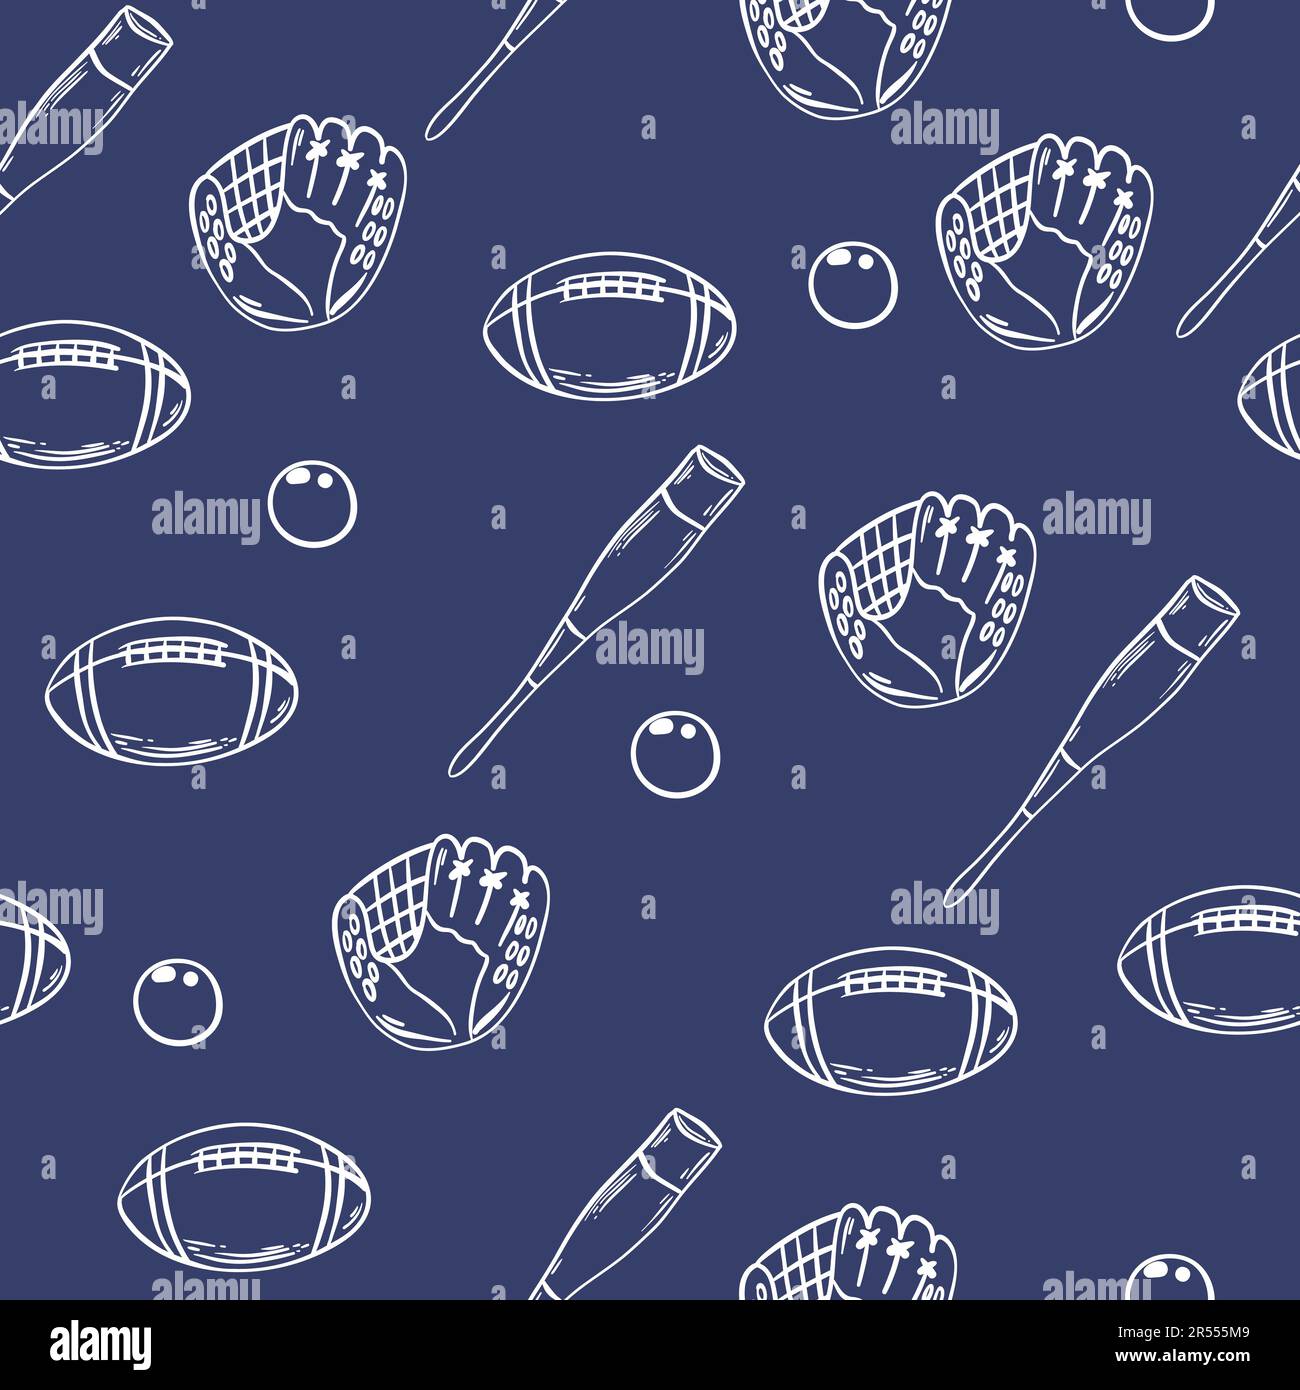 American football wallpaper design vector image. Repeating tile background of rugby balls seamless pattern texture Stock Vector